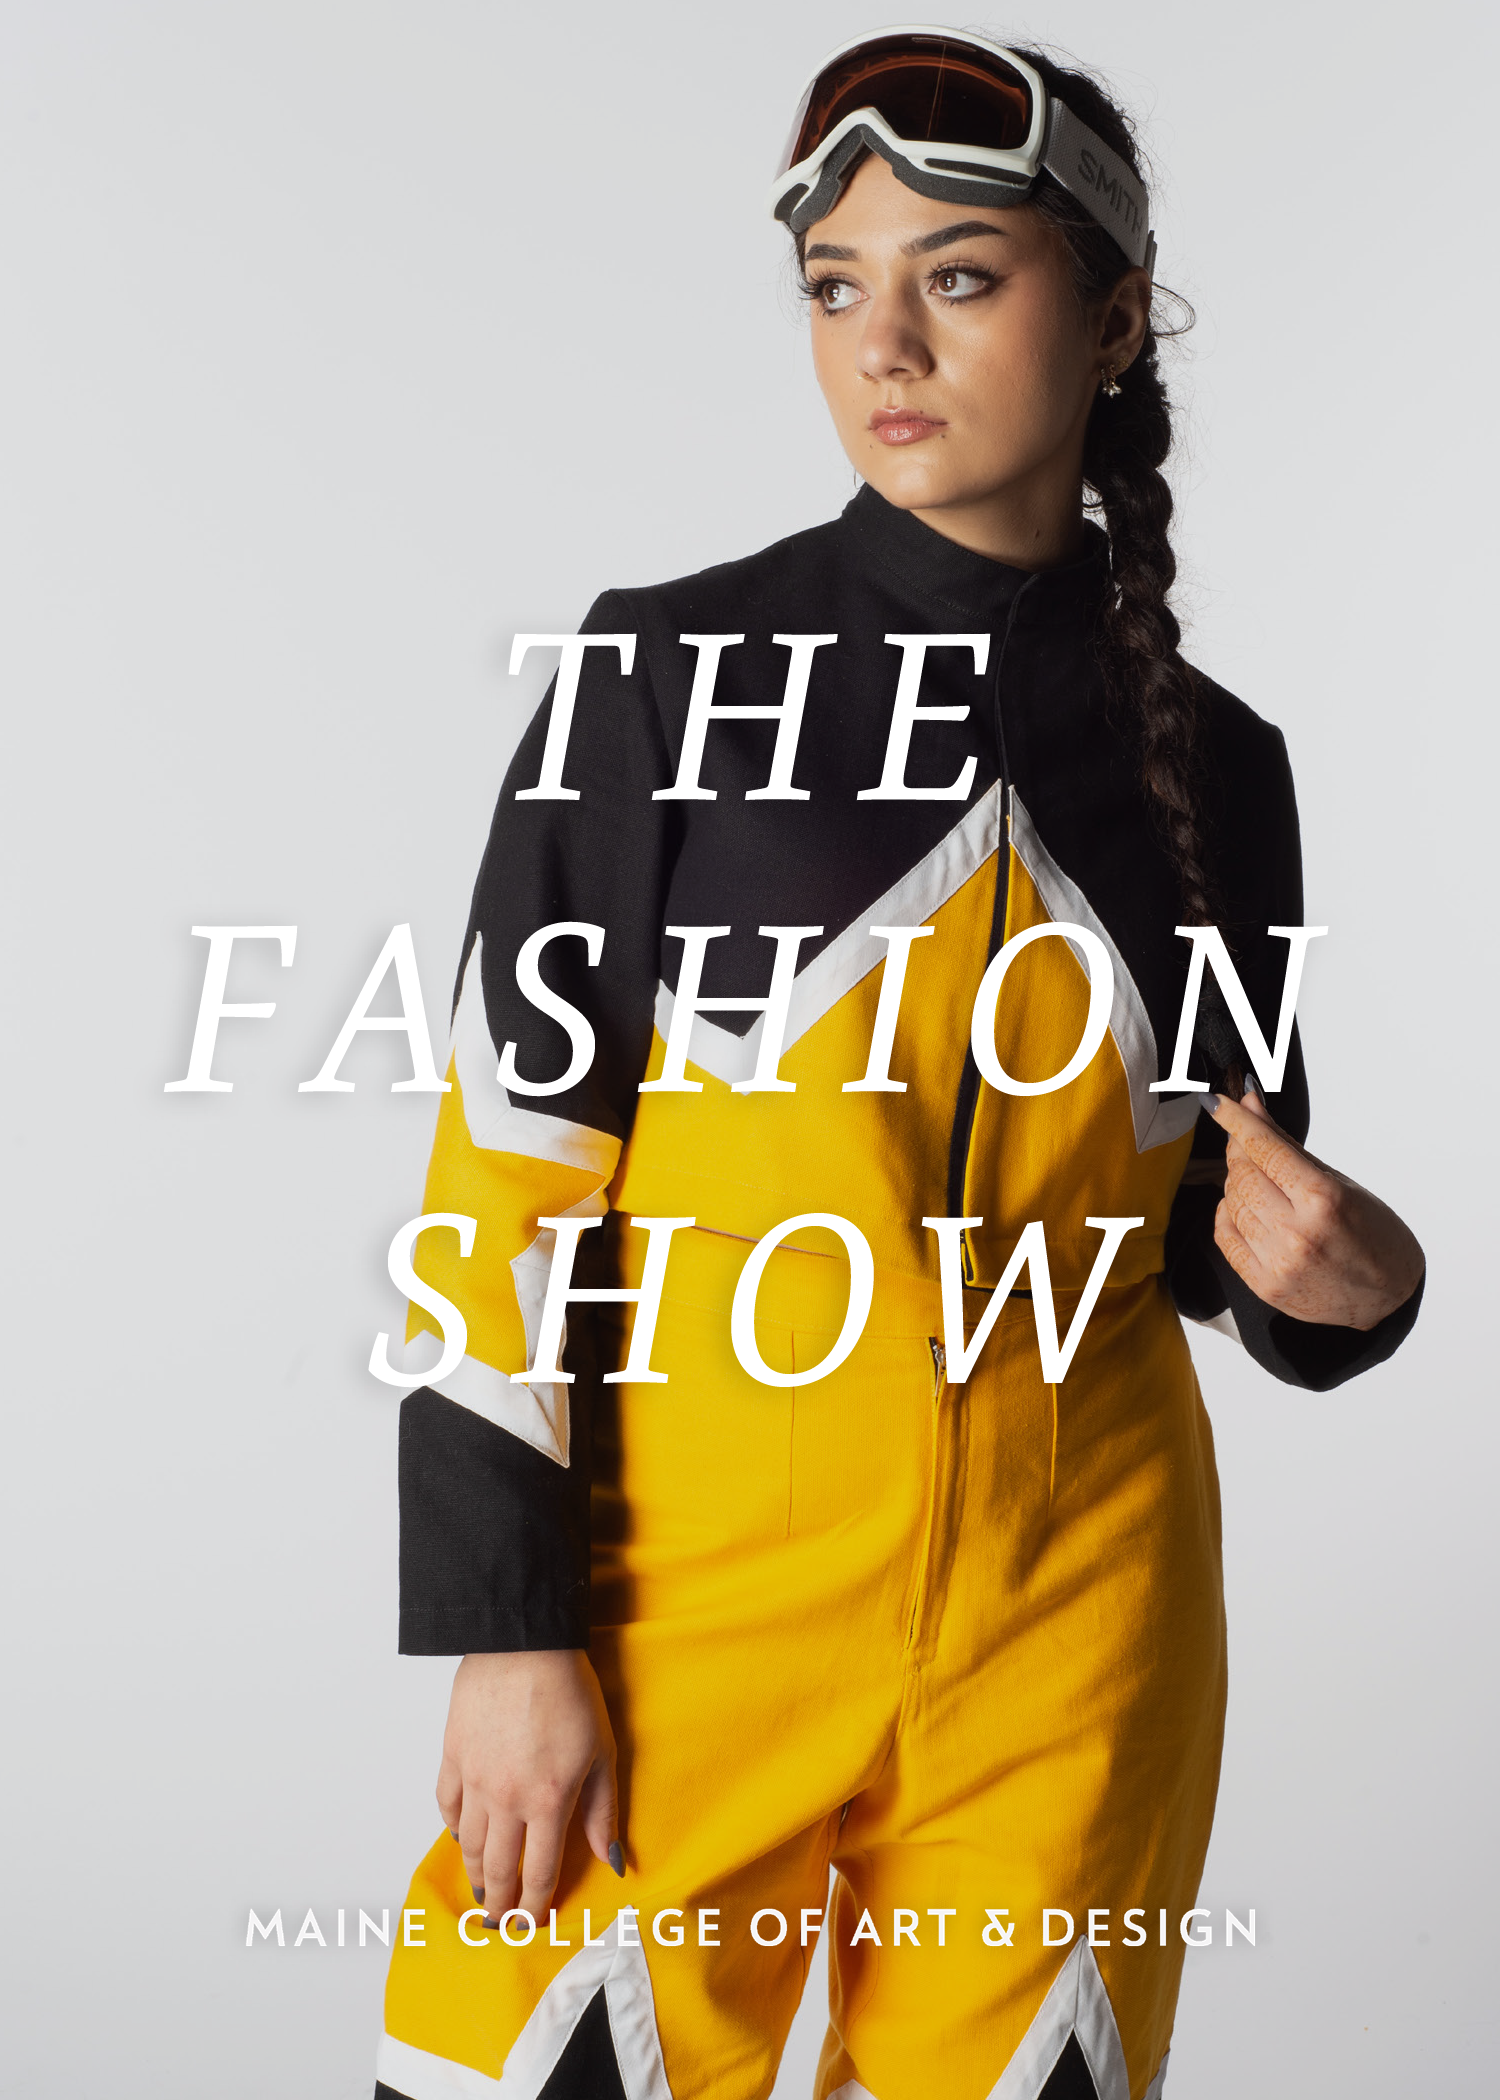 White text reading "The Fashion Show" is over a photo of a model wearing an athletic ski-inspired outfil with a yellow and black cropped jacket with stars on the elbows and high waisted yellow and black pants.